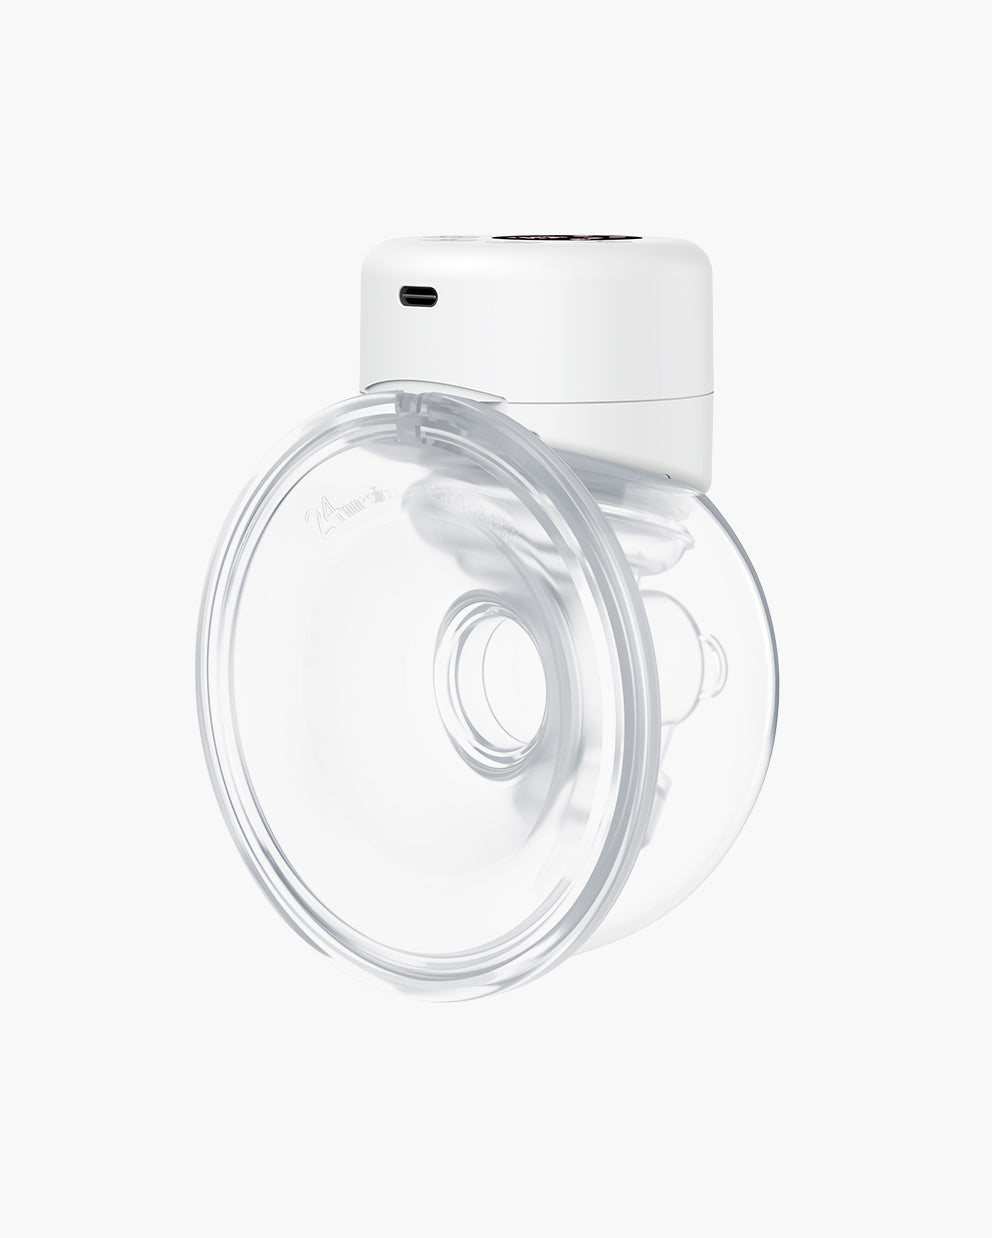 The S12 - Our 9 Levels Double Wearable Breast Pump